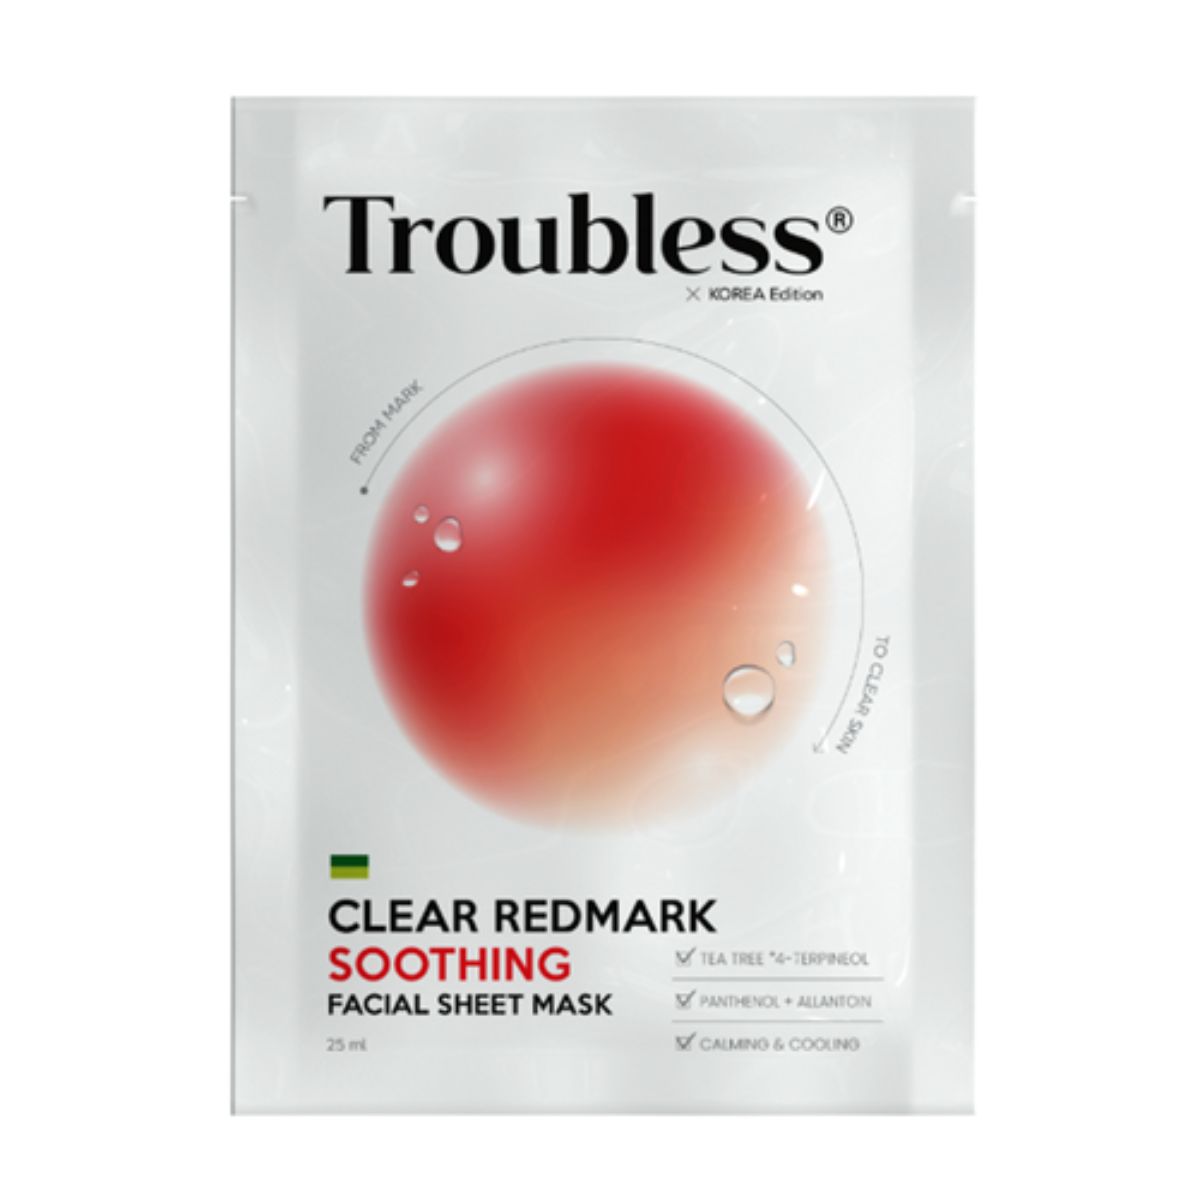 Mascarillas TROUBLESS CLEAR REDMARK SOOTHING FACIAL SHEET MASK